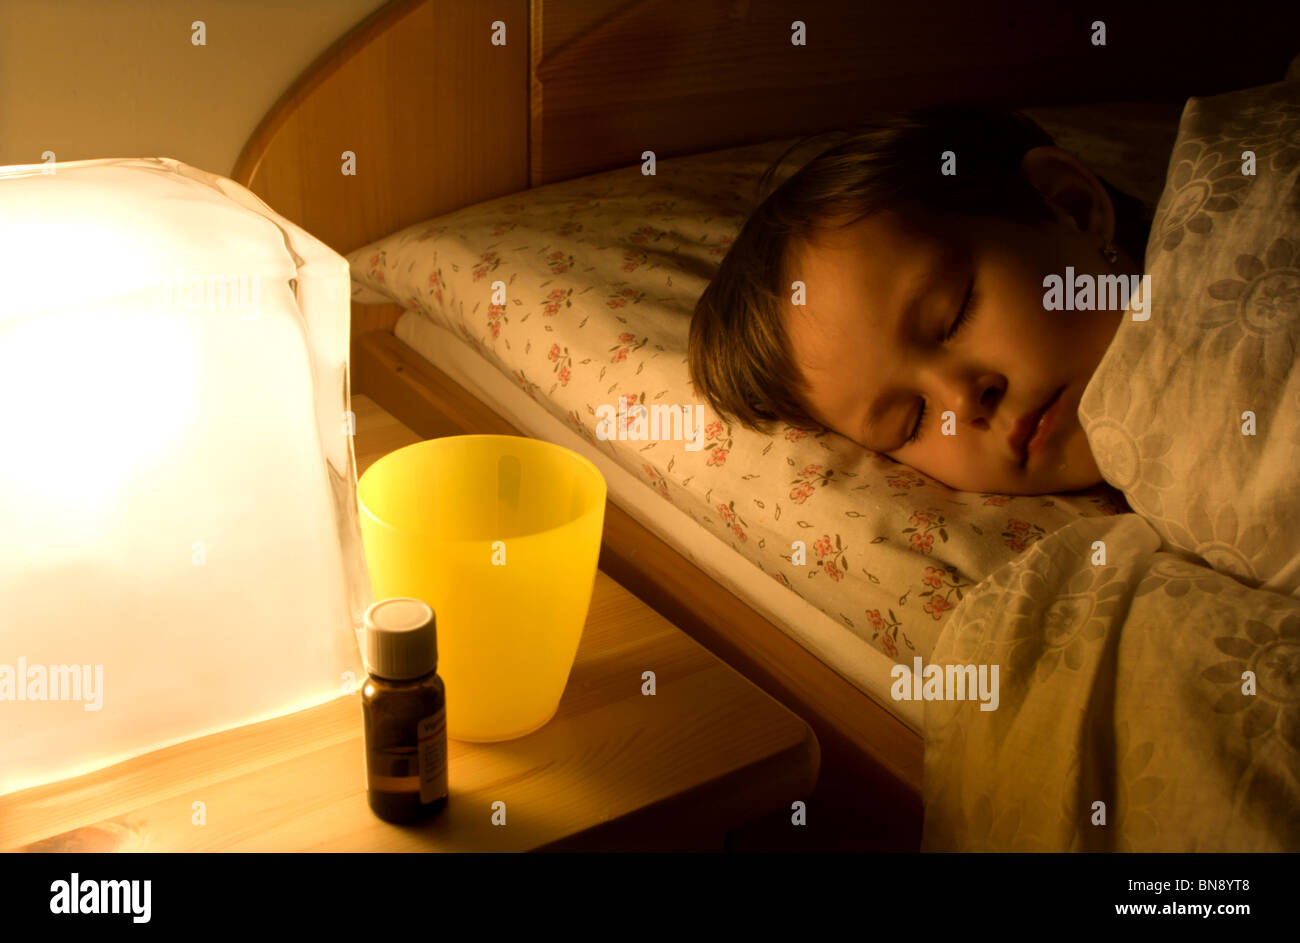 little girl in the influenza Stock Photo